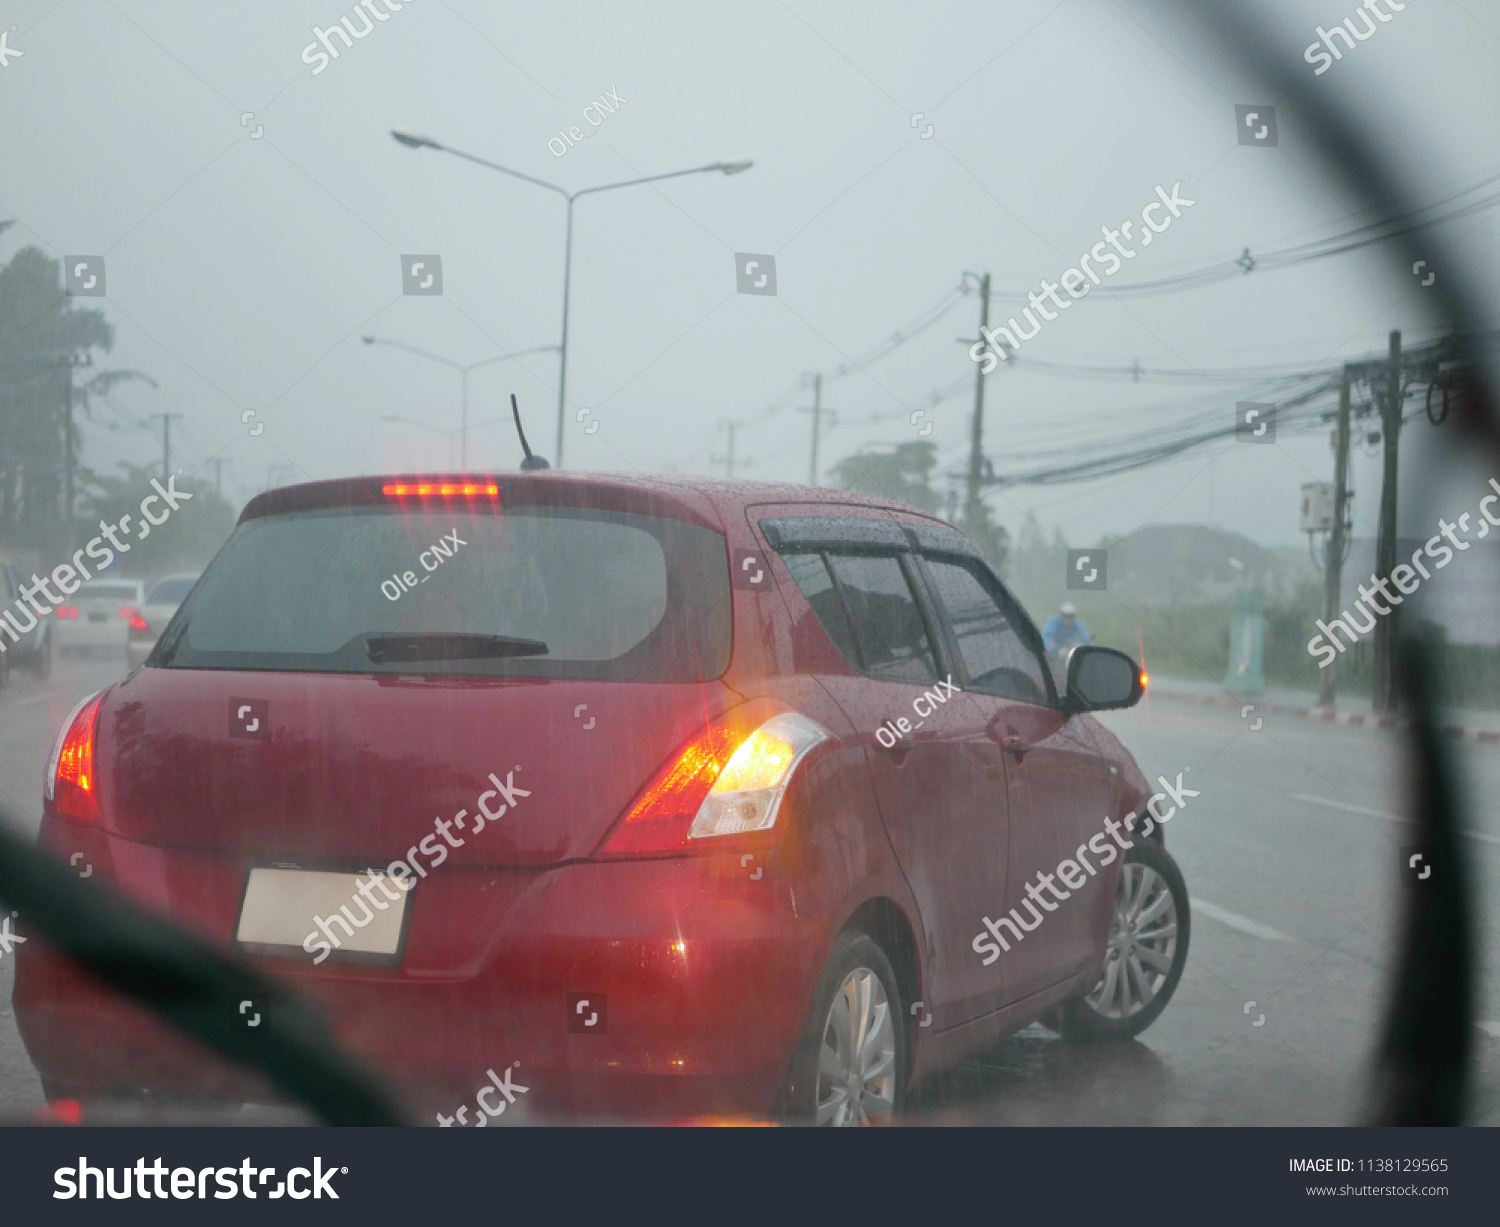 A car with its signal light on carefully making a U-turn in a heavy rain on a rainy day - driver's perspective from another car behind  #1138129565